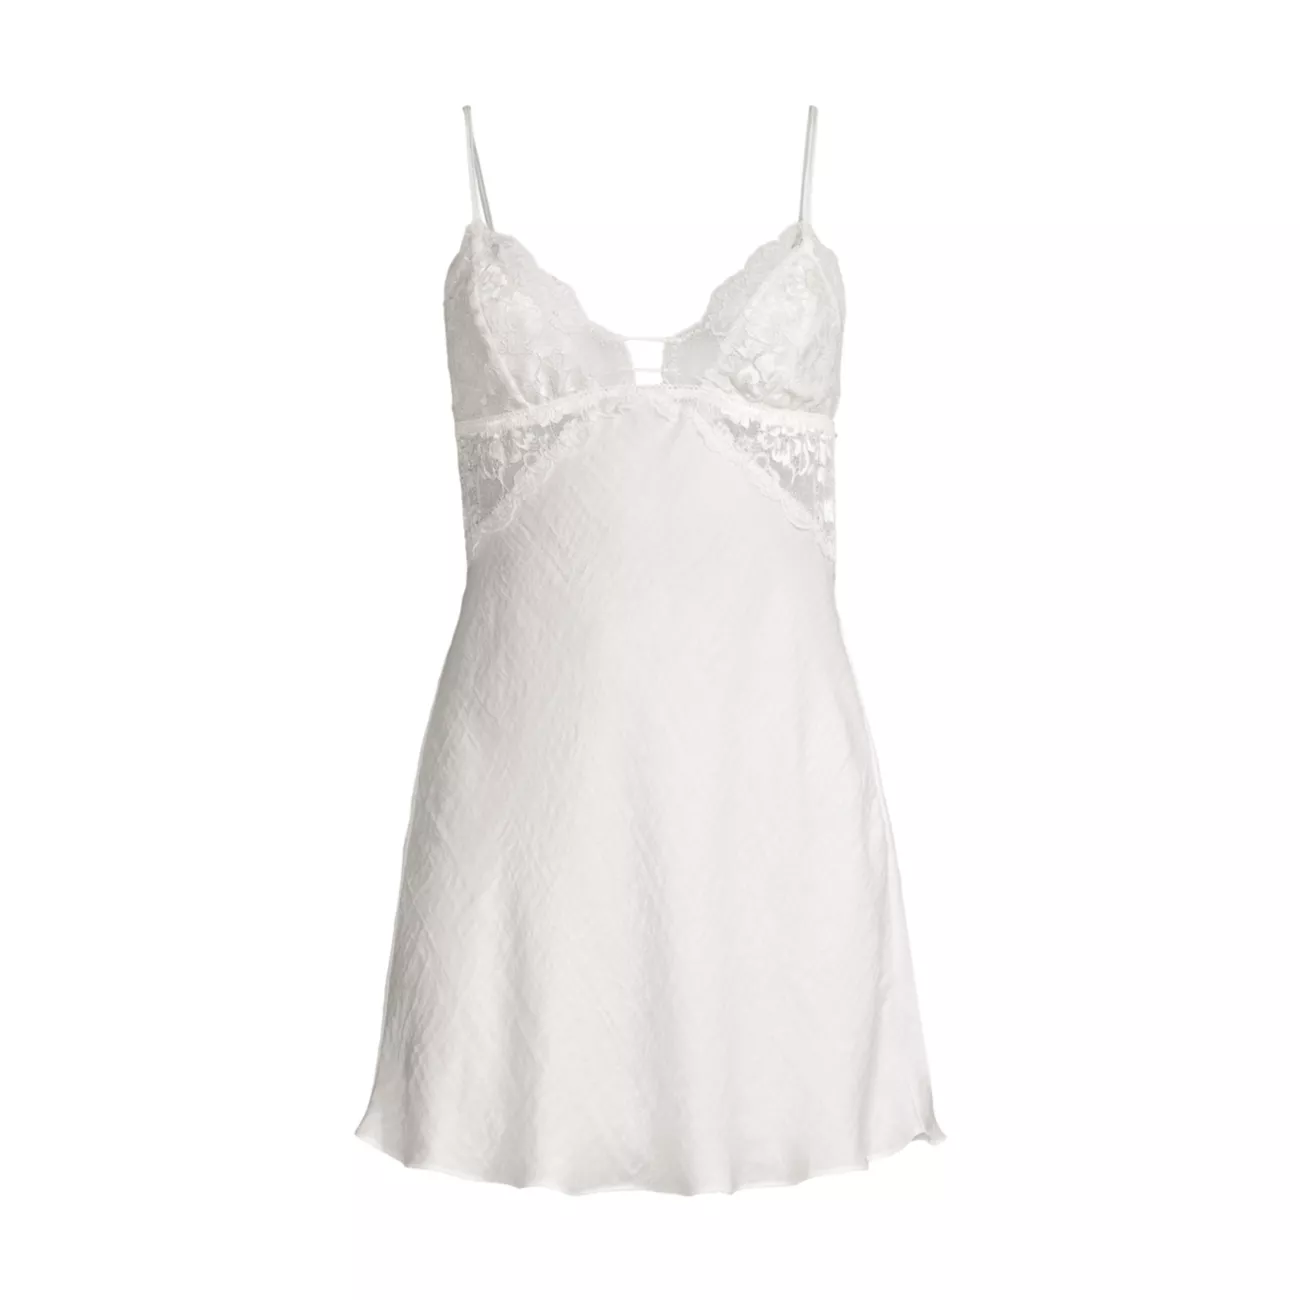 Silver Floral Lace Satin Chemise In Bloom by Jonquil